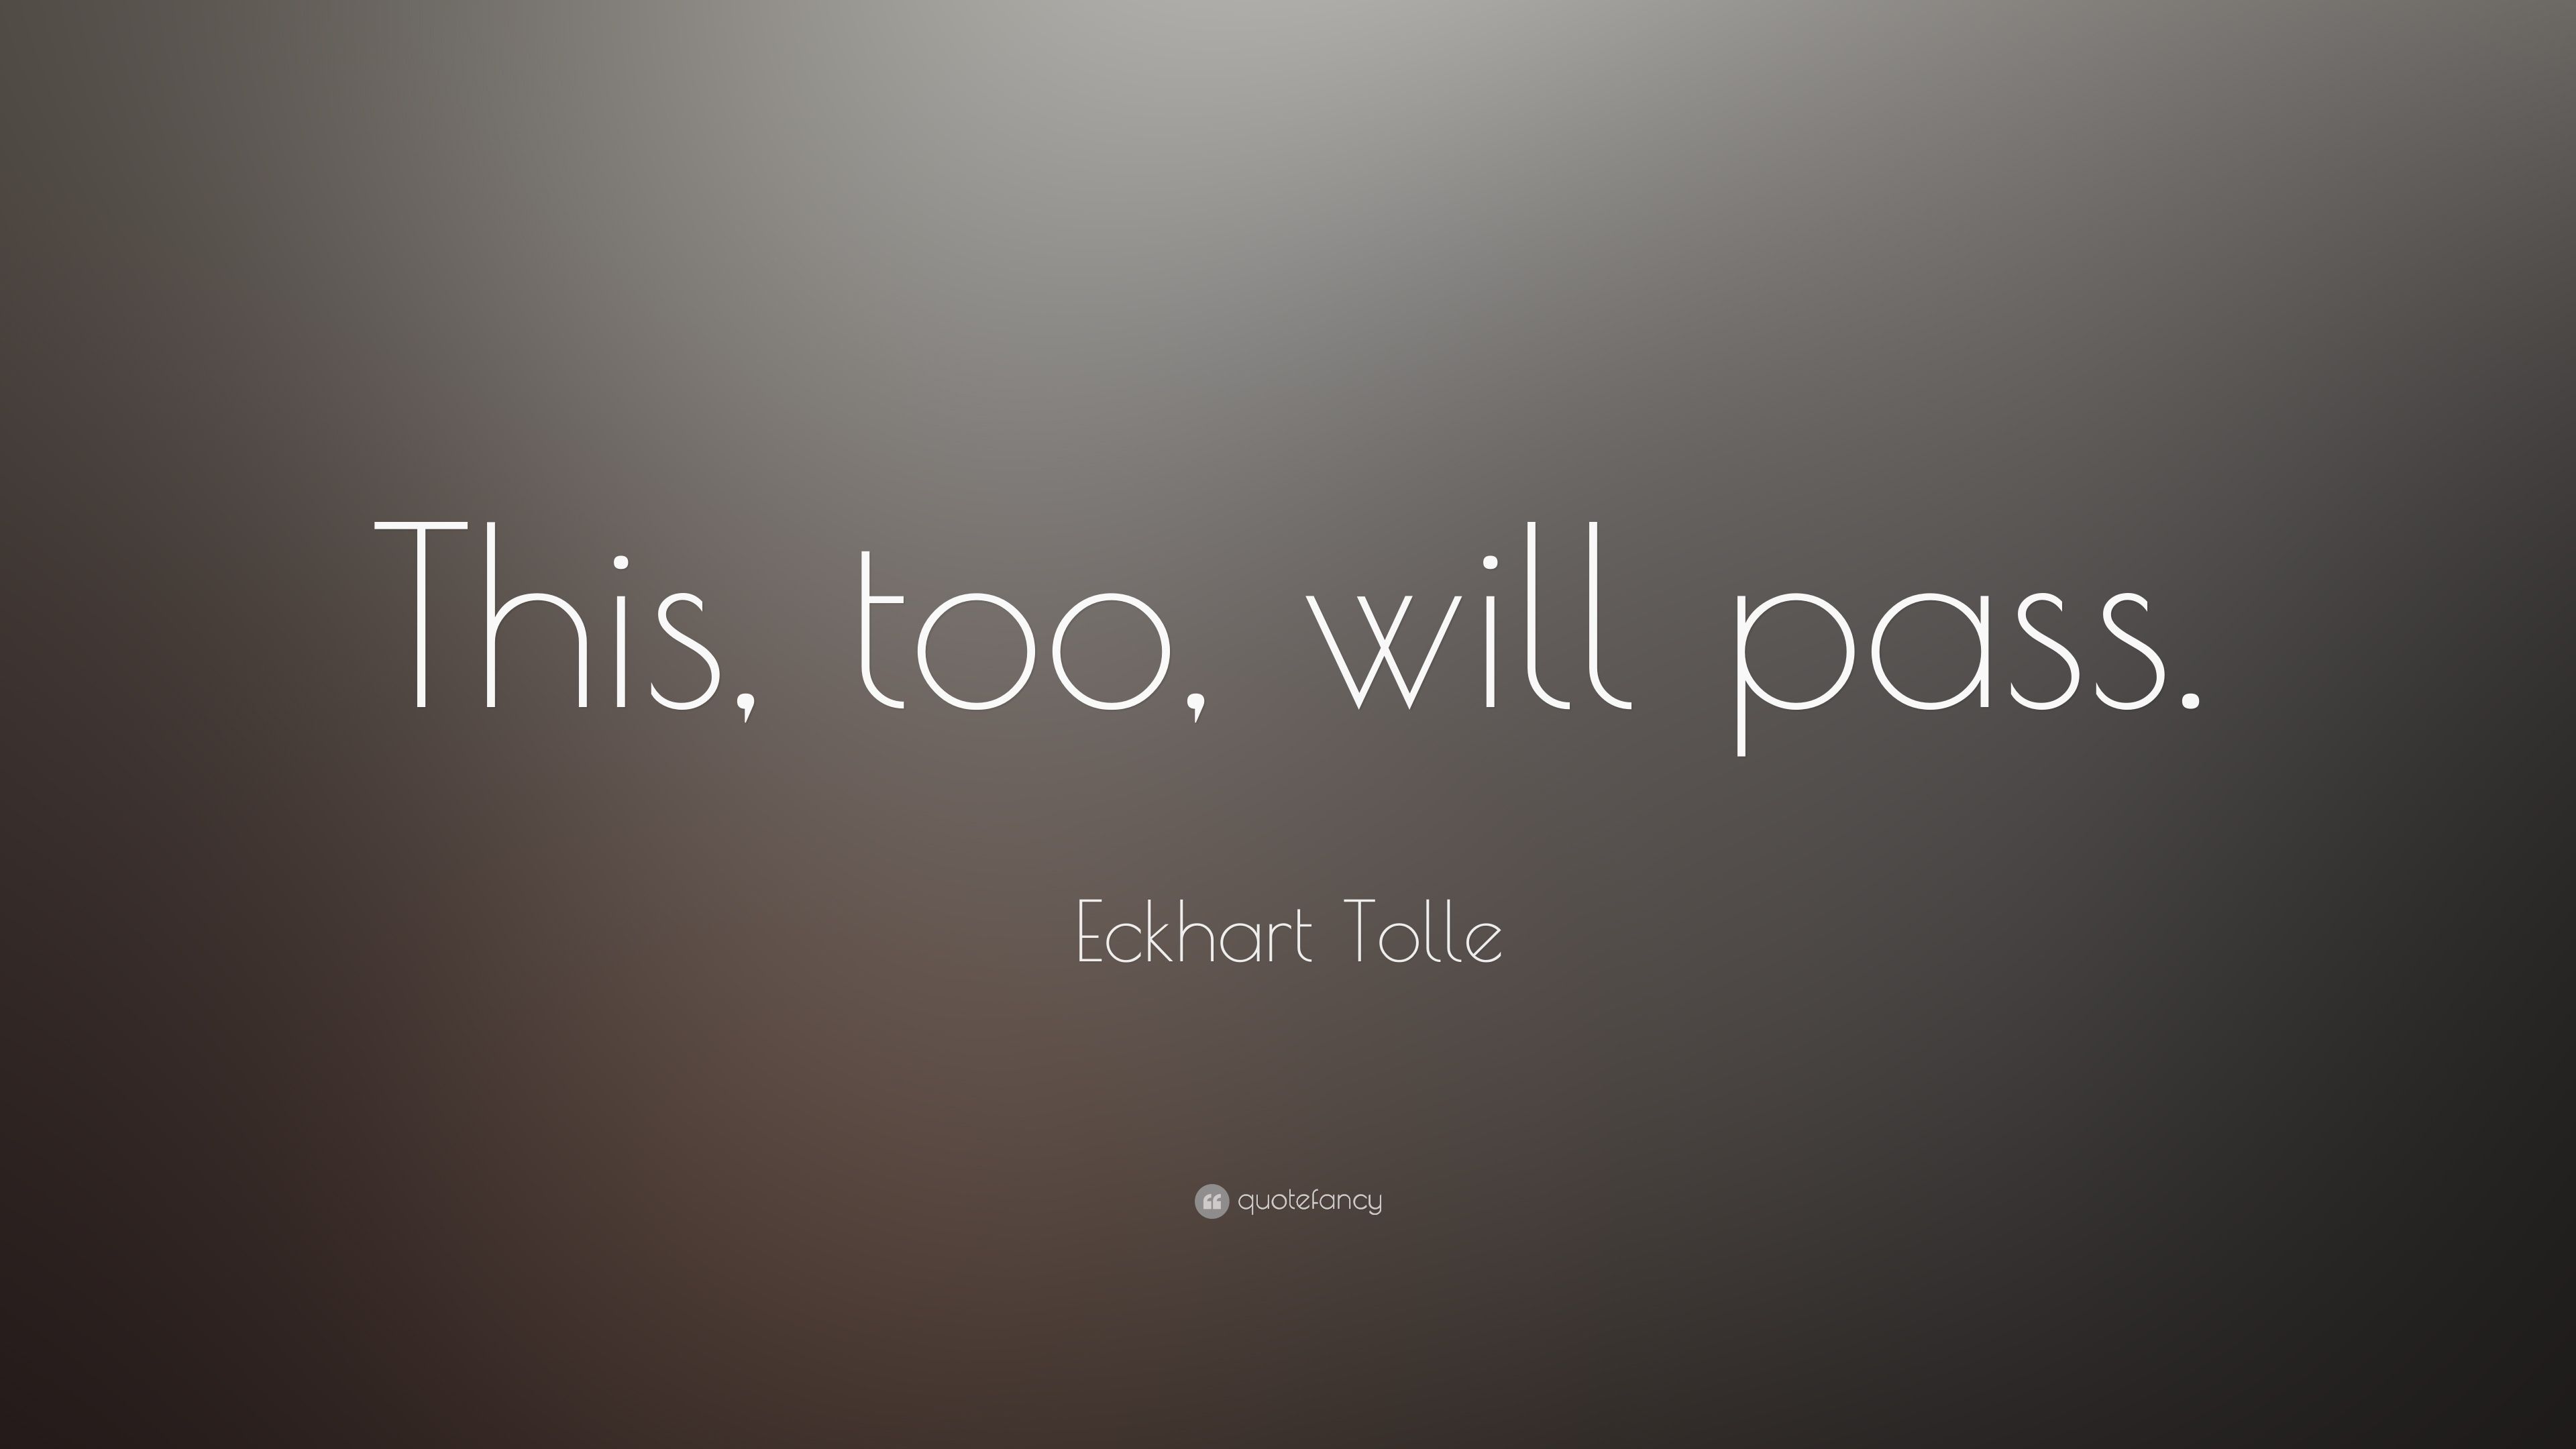 This Too Shall Pass Wallpaper Free This Too Shall Pass Background